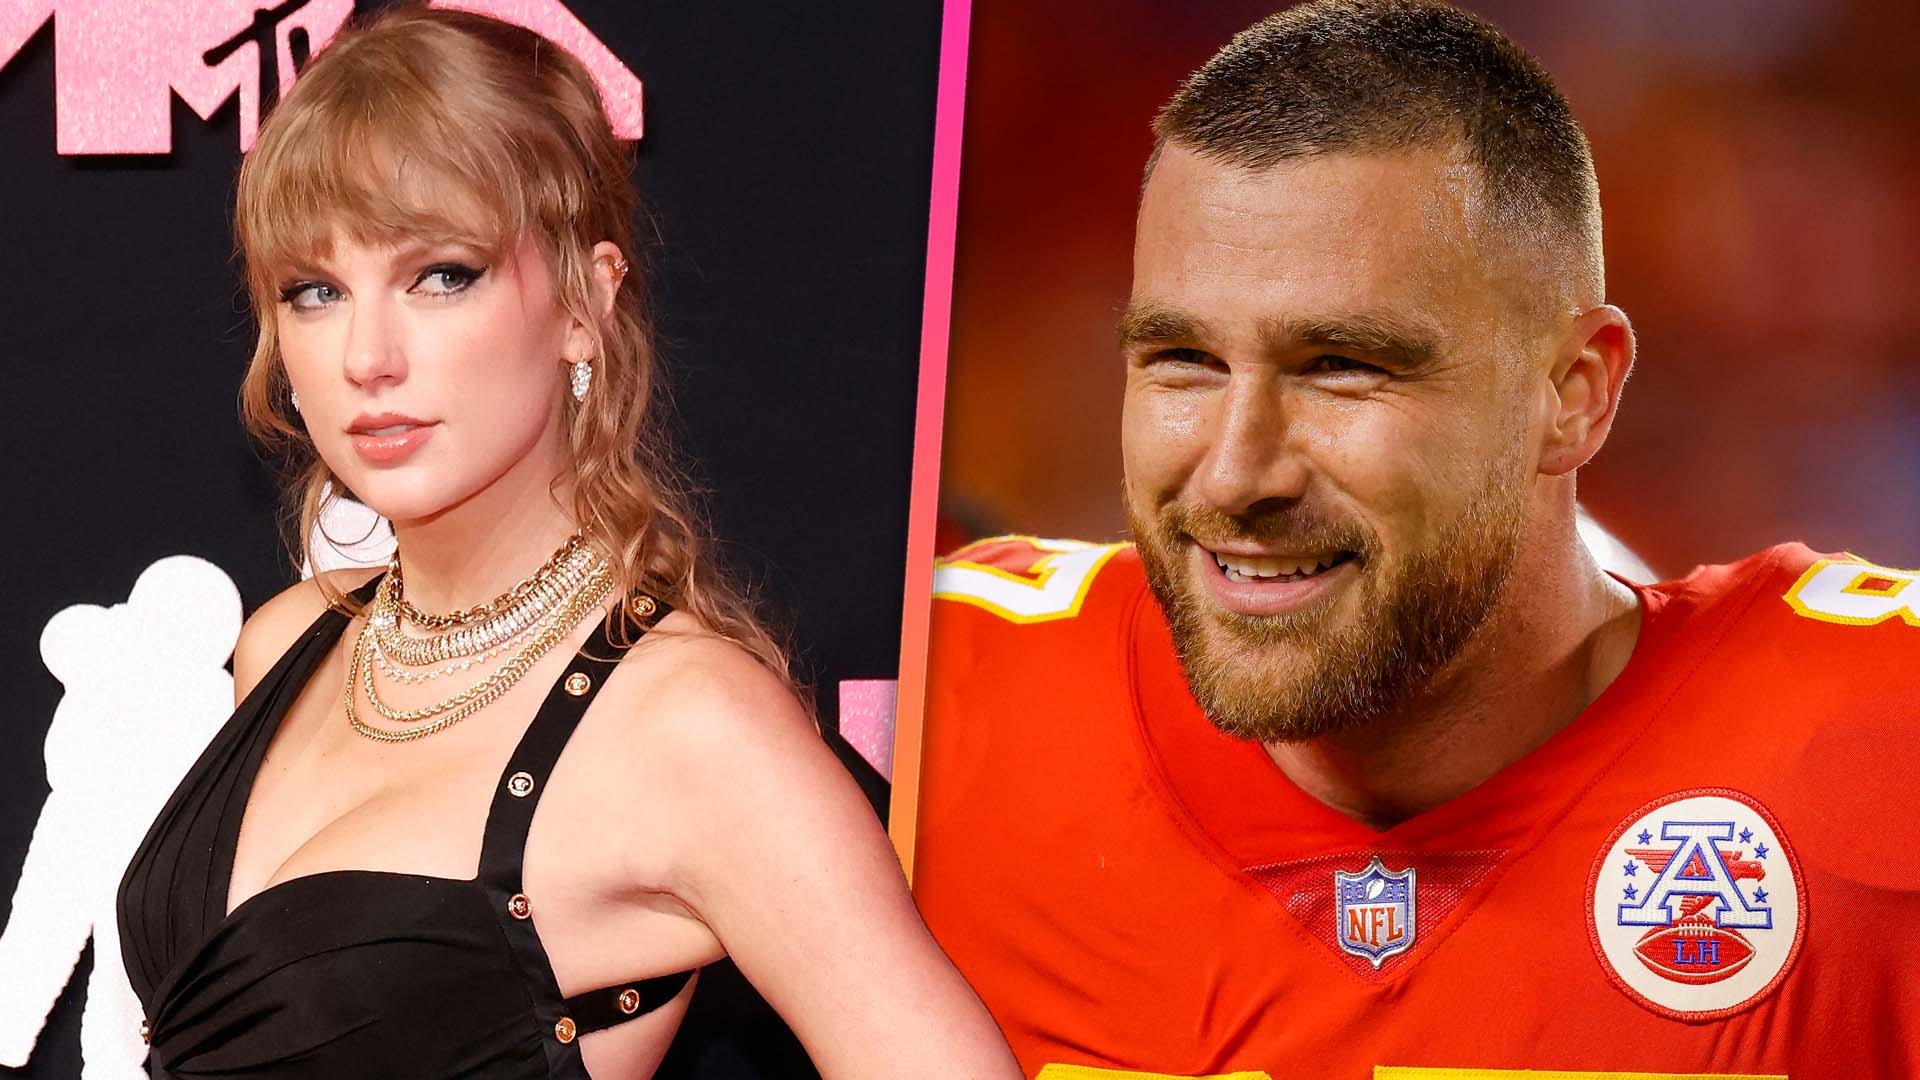 WATCH : One Major No-No For Chiefs Players When They’re Around Taylor Swift, According To Travis Kelce’s Teammate